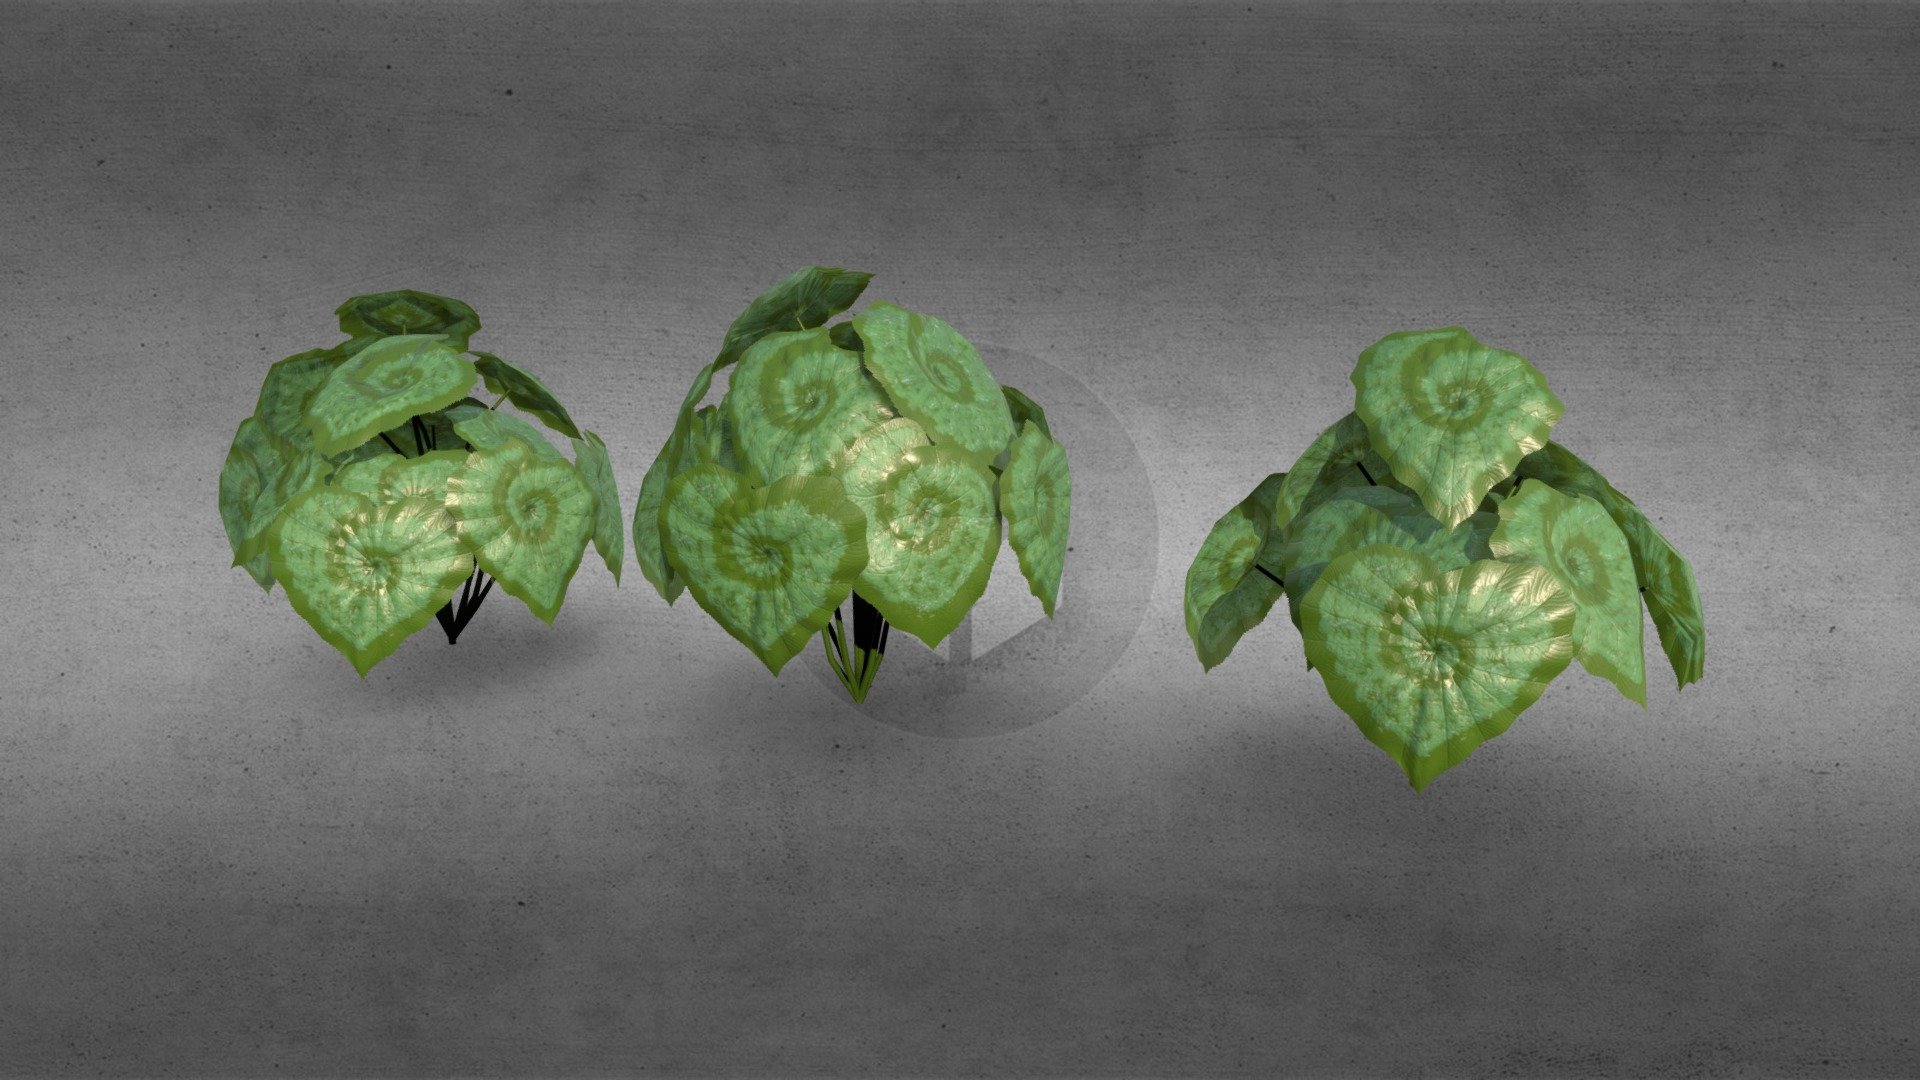 Introducing begonia rex, exotic plant

Includes:




3 Begonia Plants

For support or other information please send us an e-mail at info@sunbox.games

Check out our other work at sunbox.games - Begonia Rex - Exotic Plant - Buy Royalty Free 3D model by Sunbox Games (@sunboxgames) 3d model